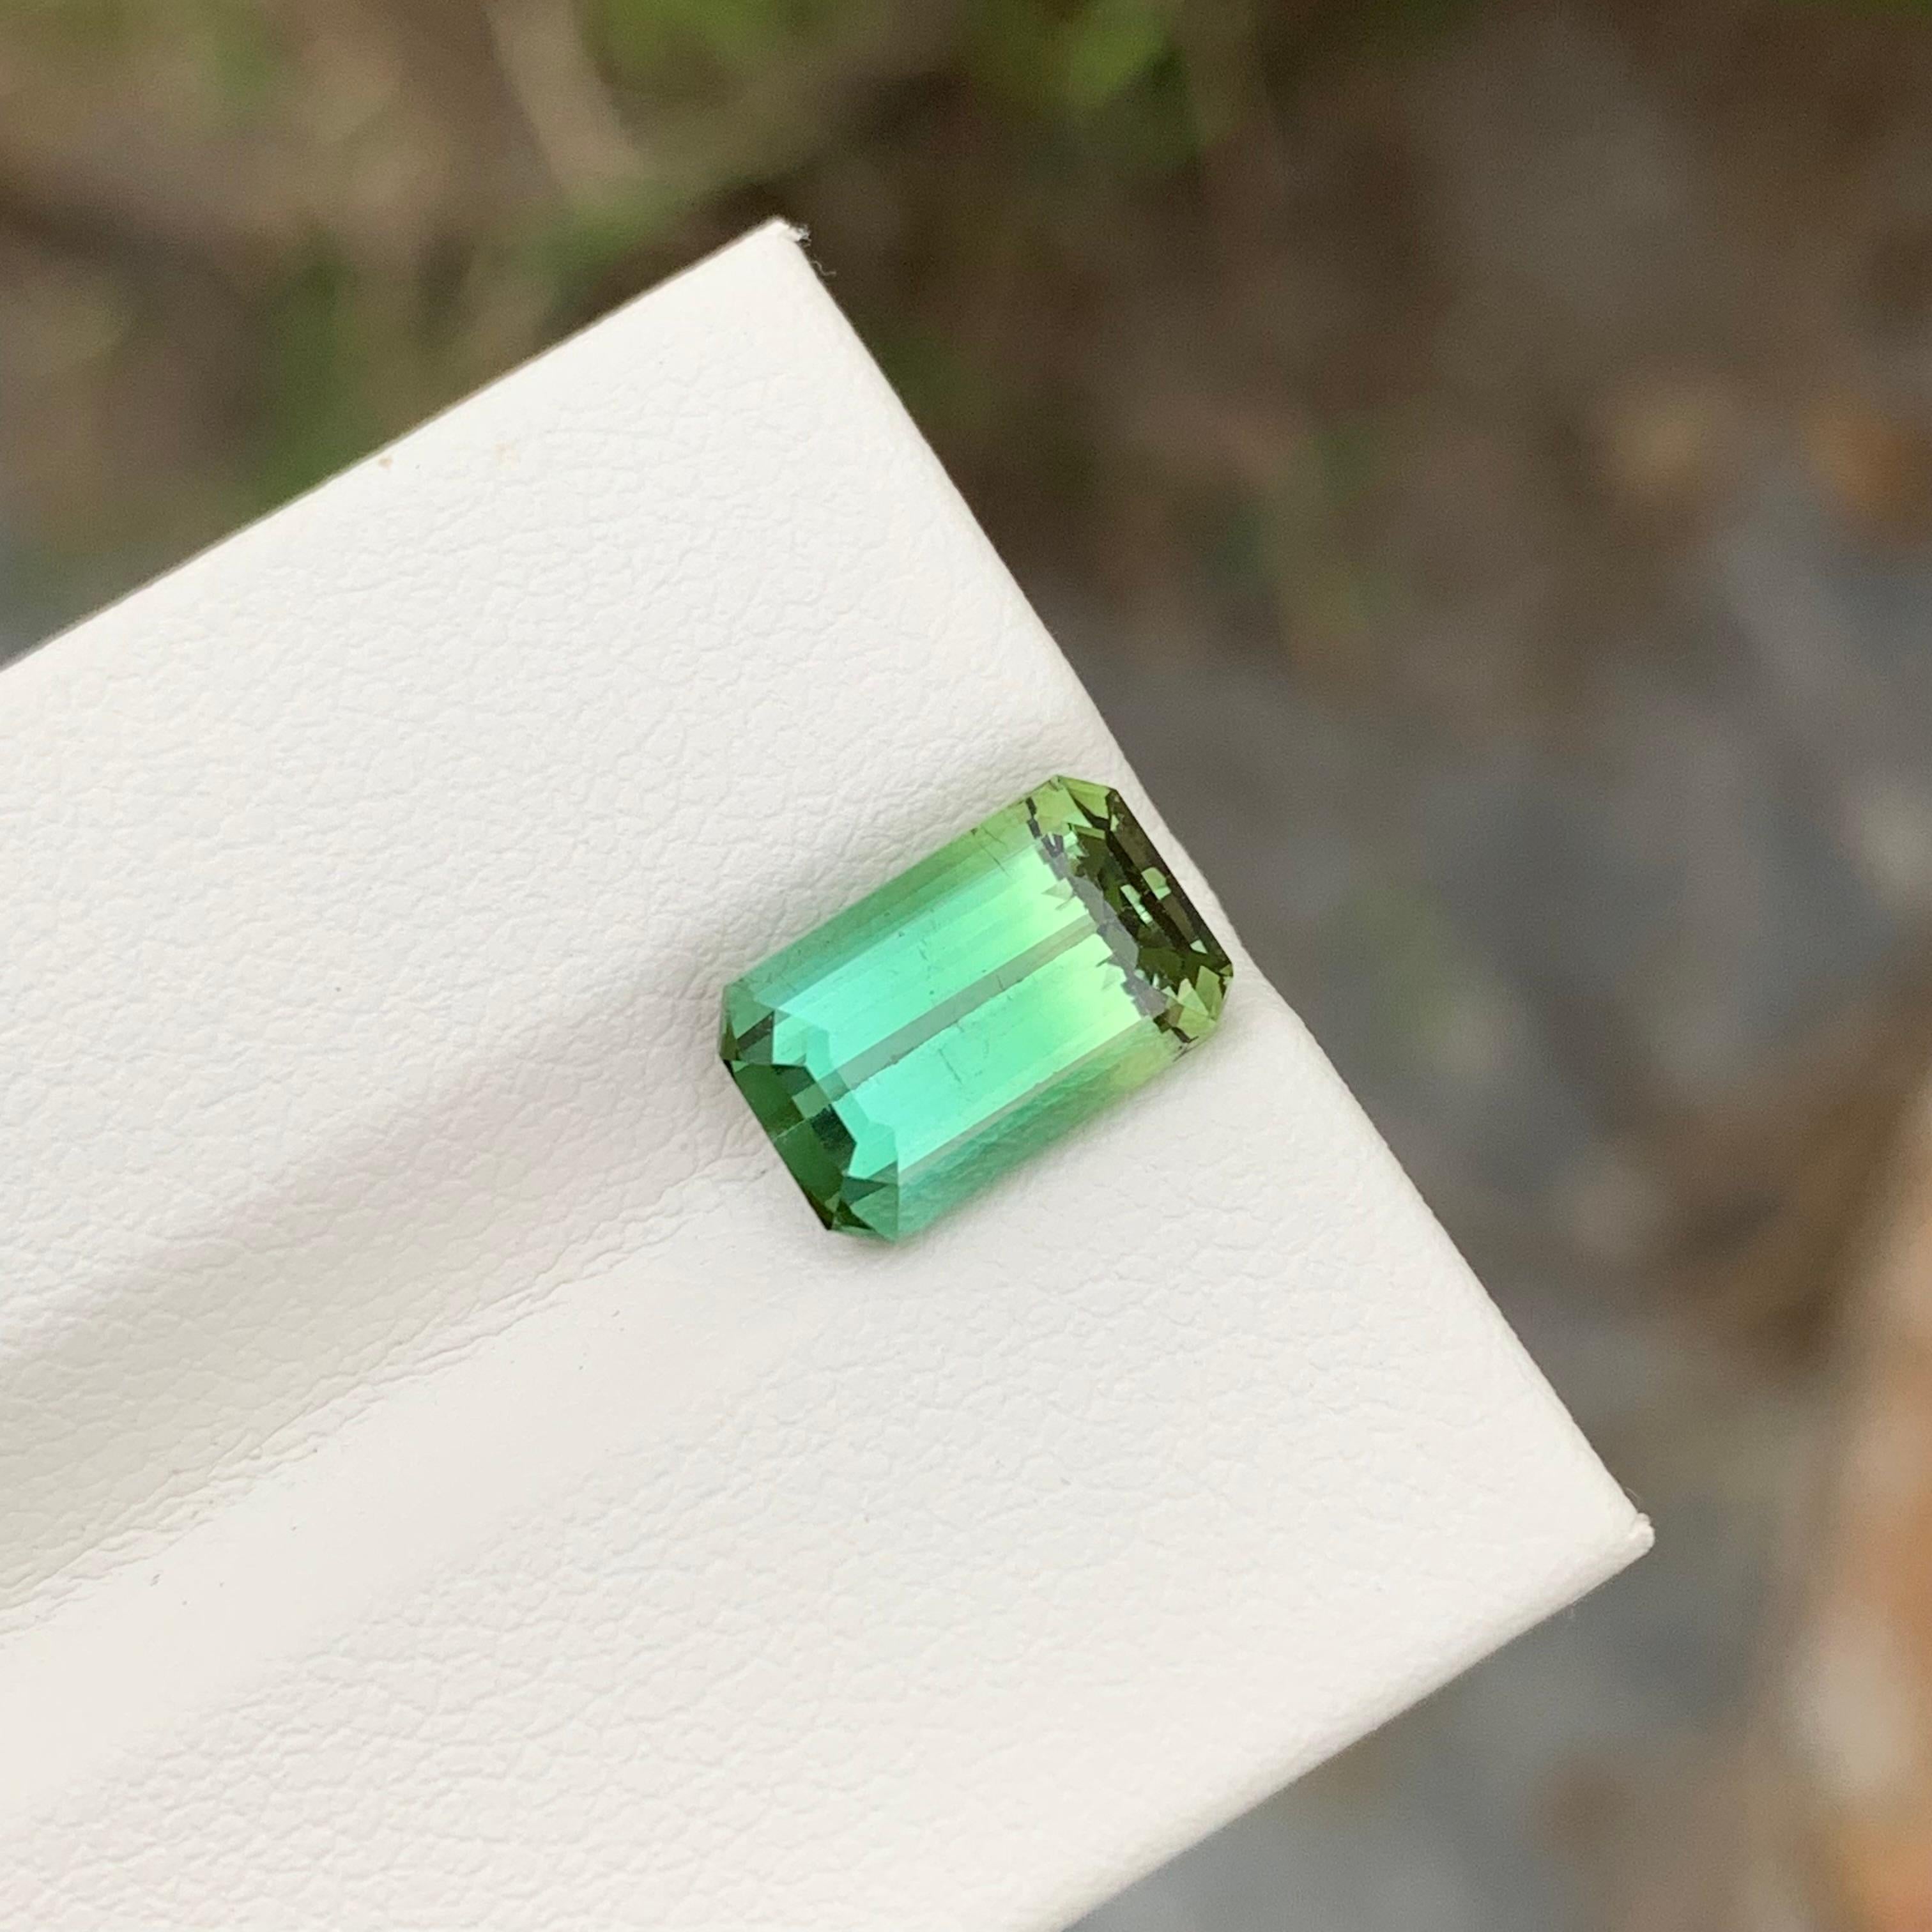 Loose Bi Colour Tourmaline

Weight: 3.35 Carats
Dimension: 10 x 6.3 x 6.7 Mm
Colour: Green And Yellow 
Origin: Africa 
Certificate: On Demand
Treatment: Non

Tourmaline is a captivating gemstone known for its remarkable variety of colors, making it